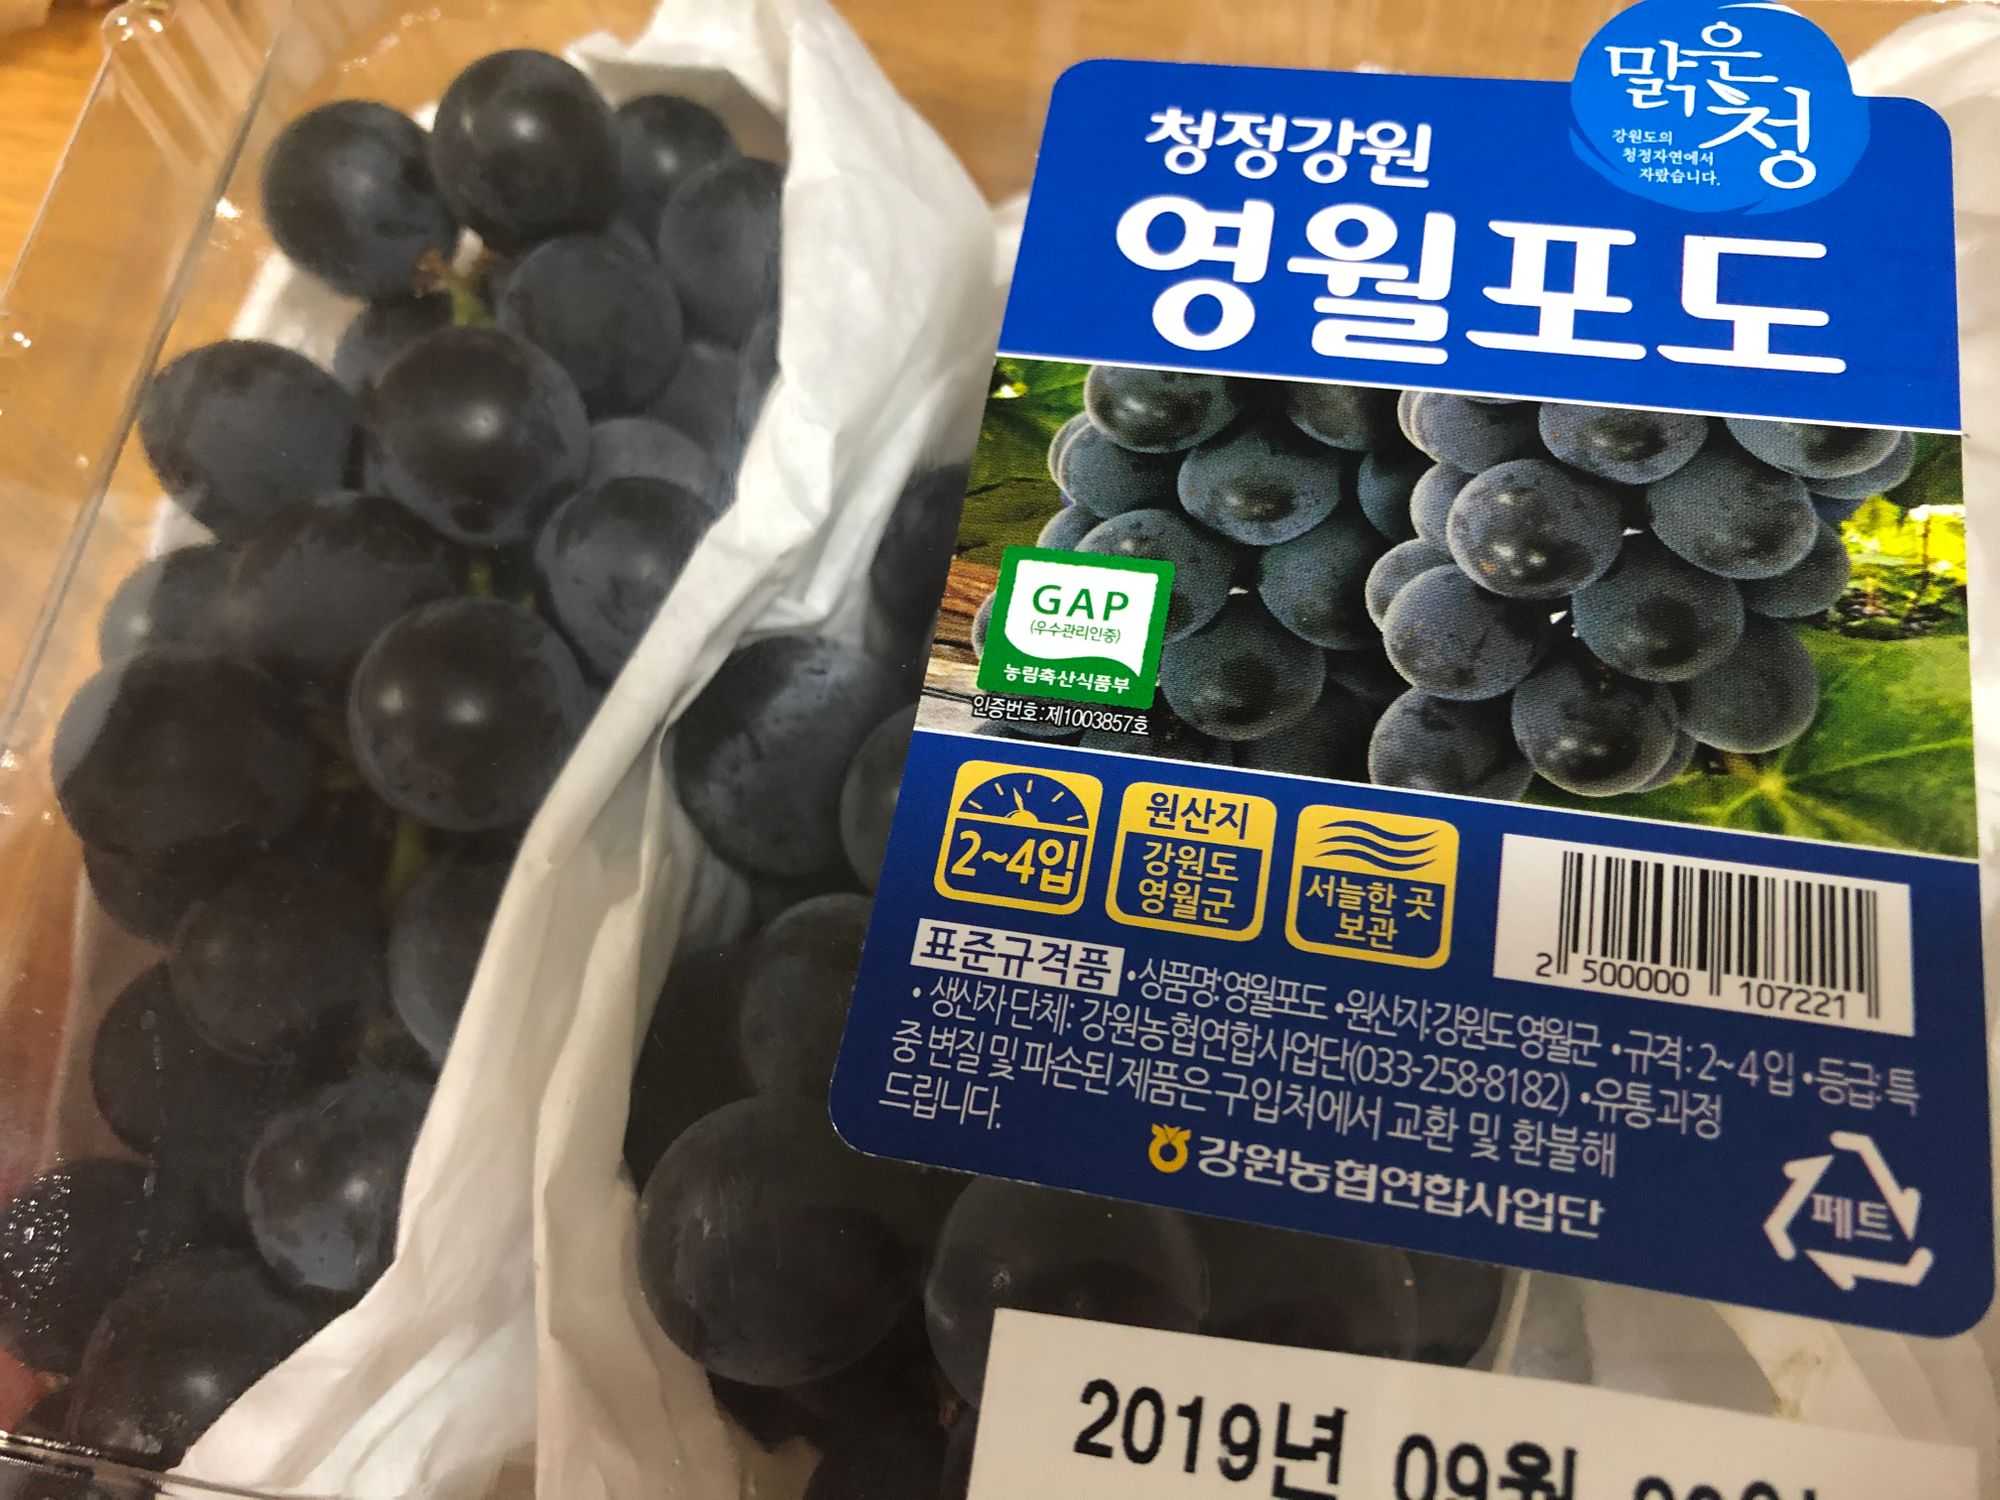 Yeongwol Grapes (Image by author)